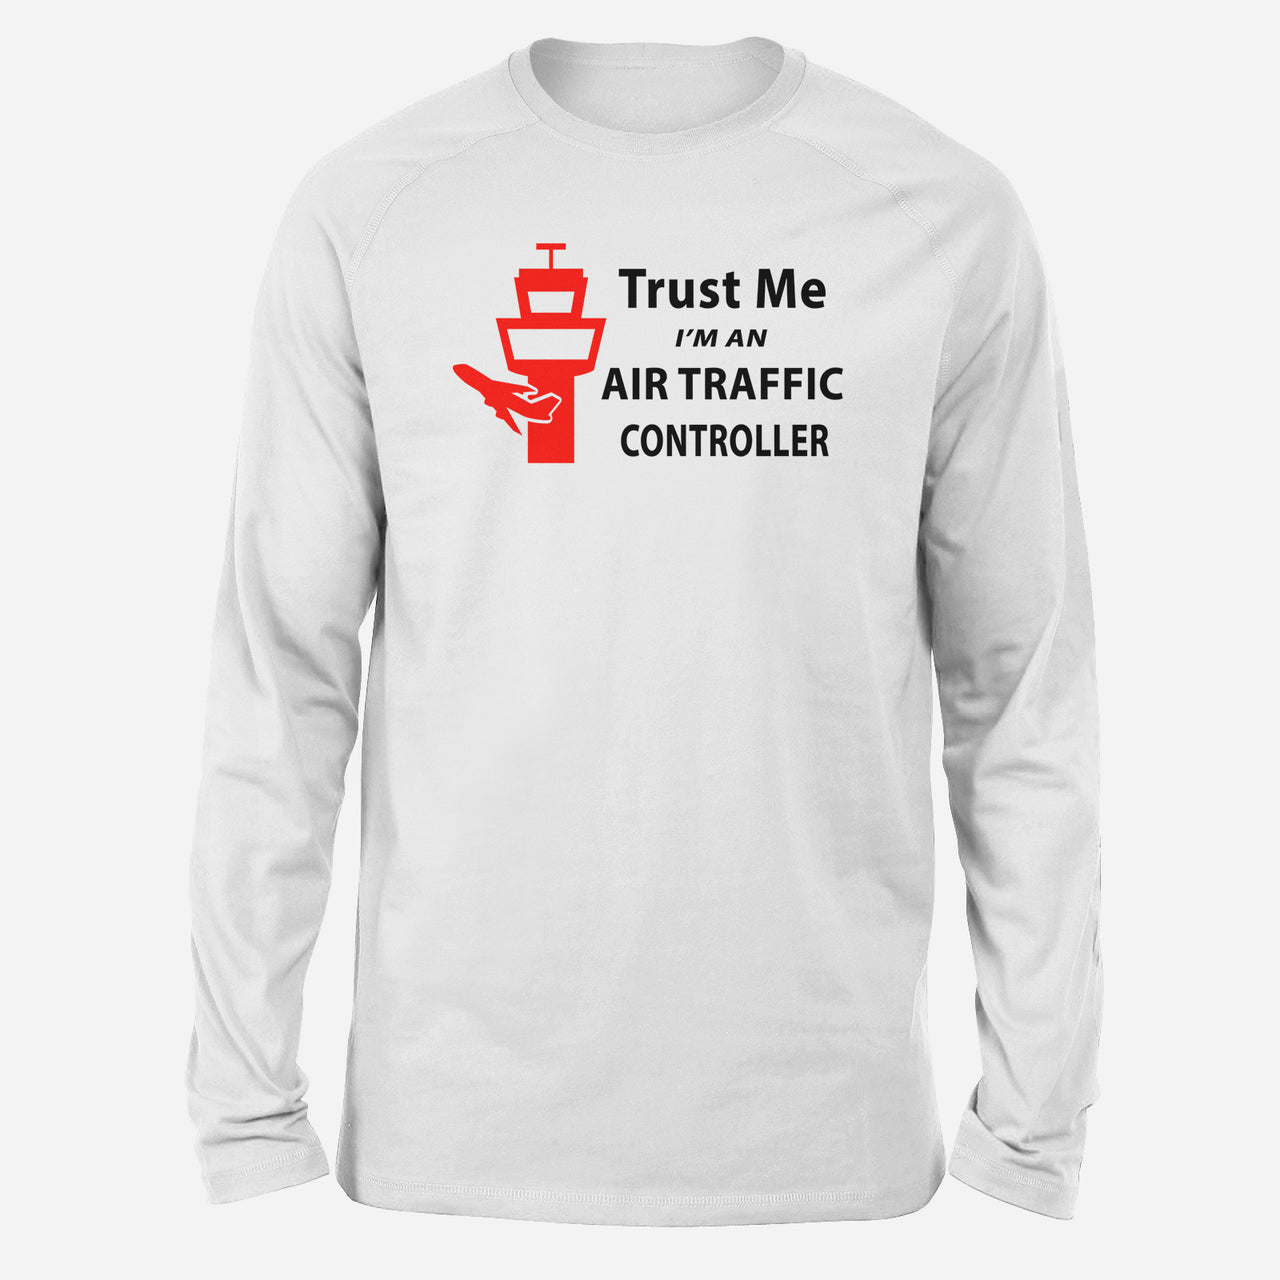 Trust Me I'm an Air Traffic Controller Designed Long-Sleeve T-Shirts